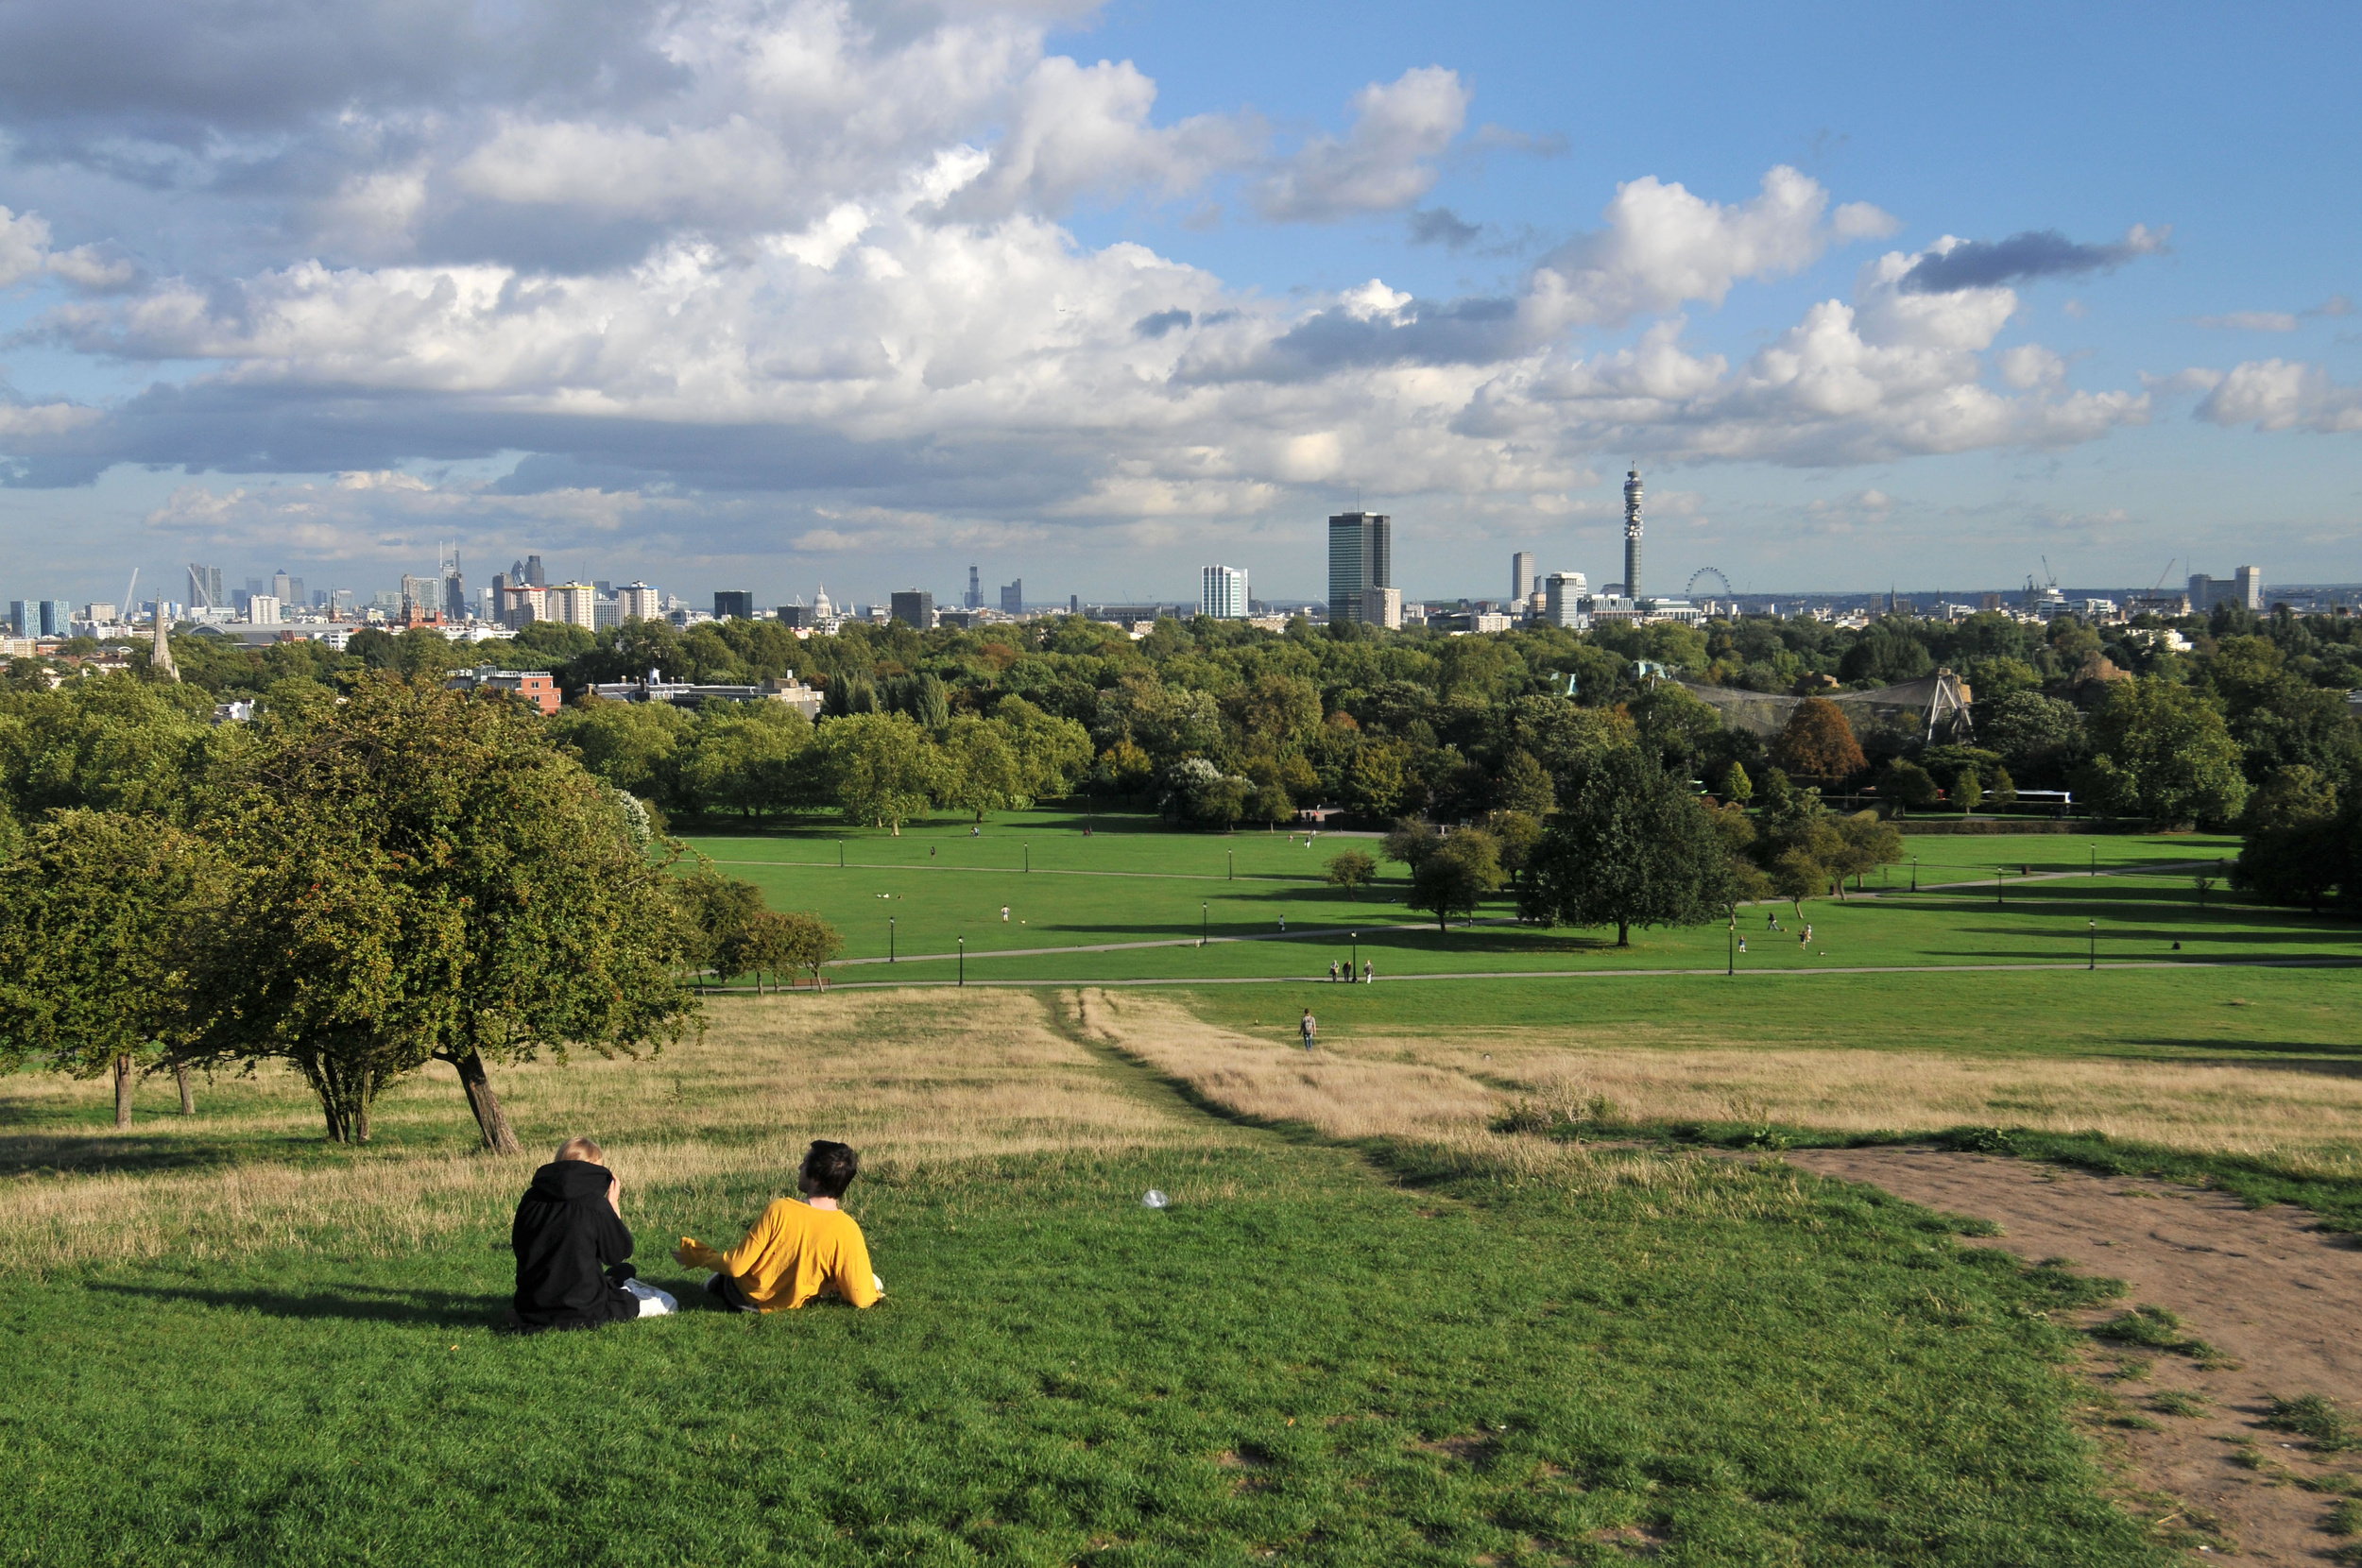 <p>Need a pic for Instagram? Head over to Primrose Hill for a view of London's skyline. </p><p>You may also like: <a href='https://www.yardbarker.com/lifestyle/articles/the_12_best_day_trips_from_european_cities_031524/s1__38397783'>The 12 best day trips from European cities</a></p>